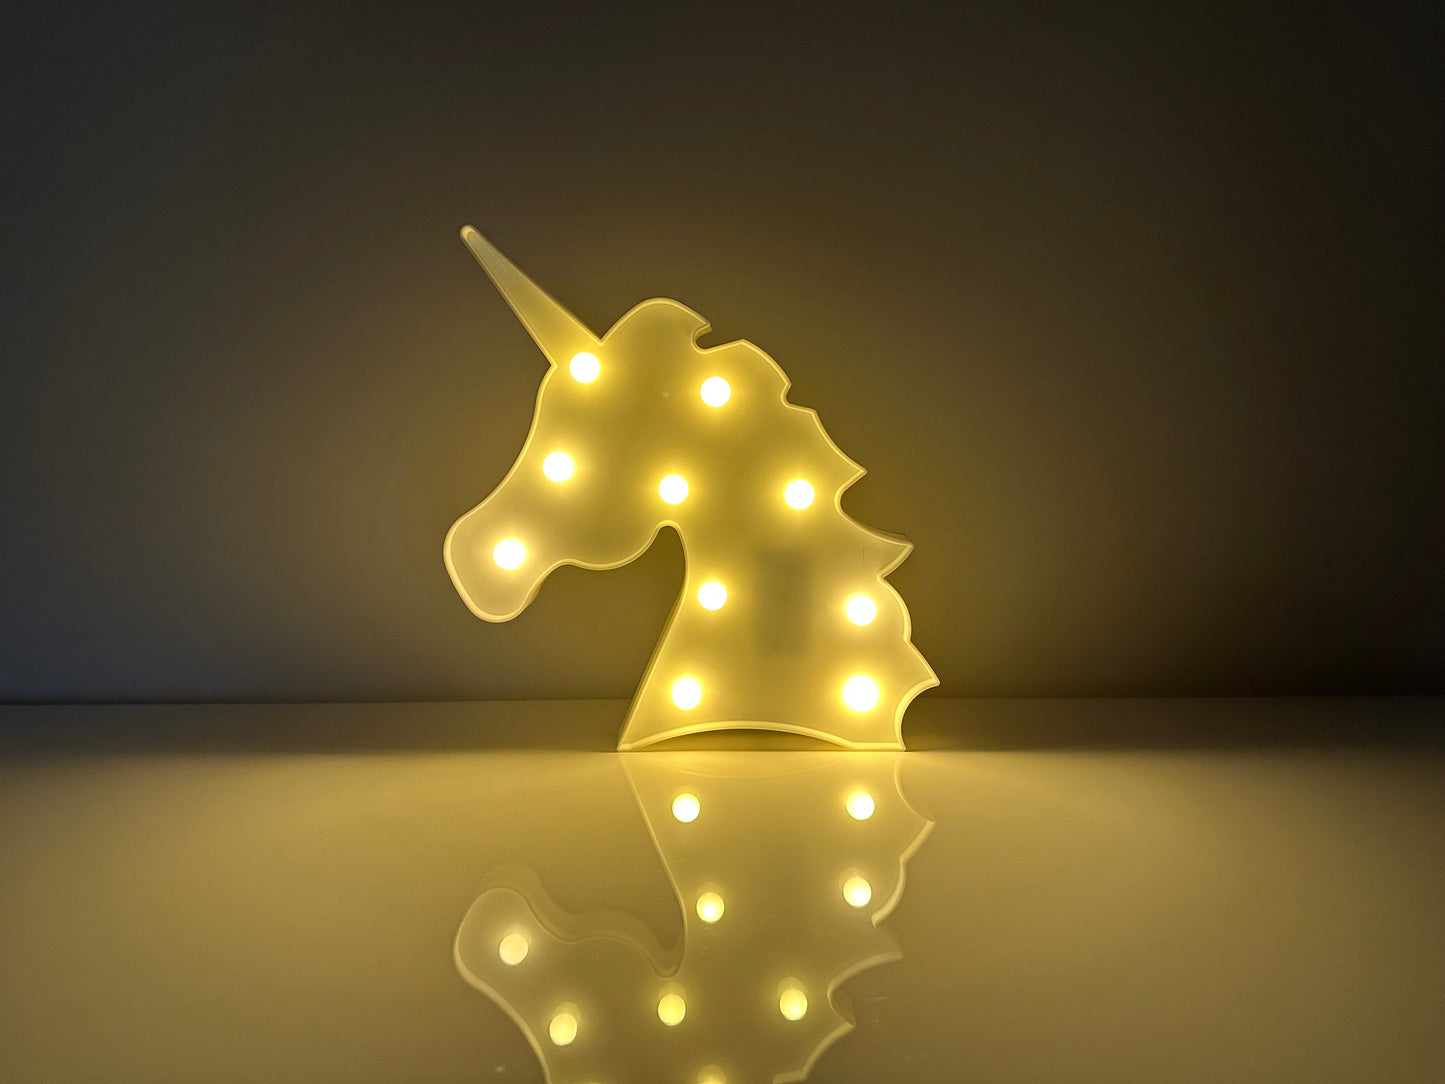 LED Unicorn Sign Light, Warm White LED Lamp For Living Room & Bedroom, Table & Wall Christmas Decoration for Kids & Adults - Battery Powered - White